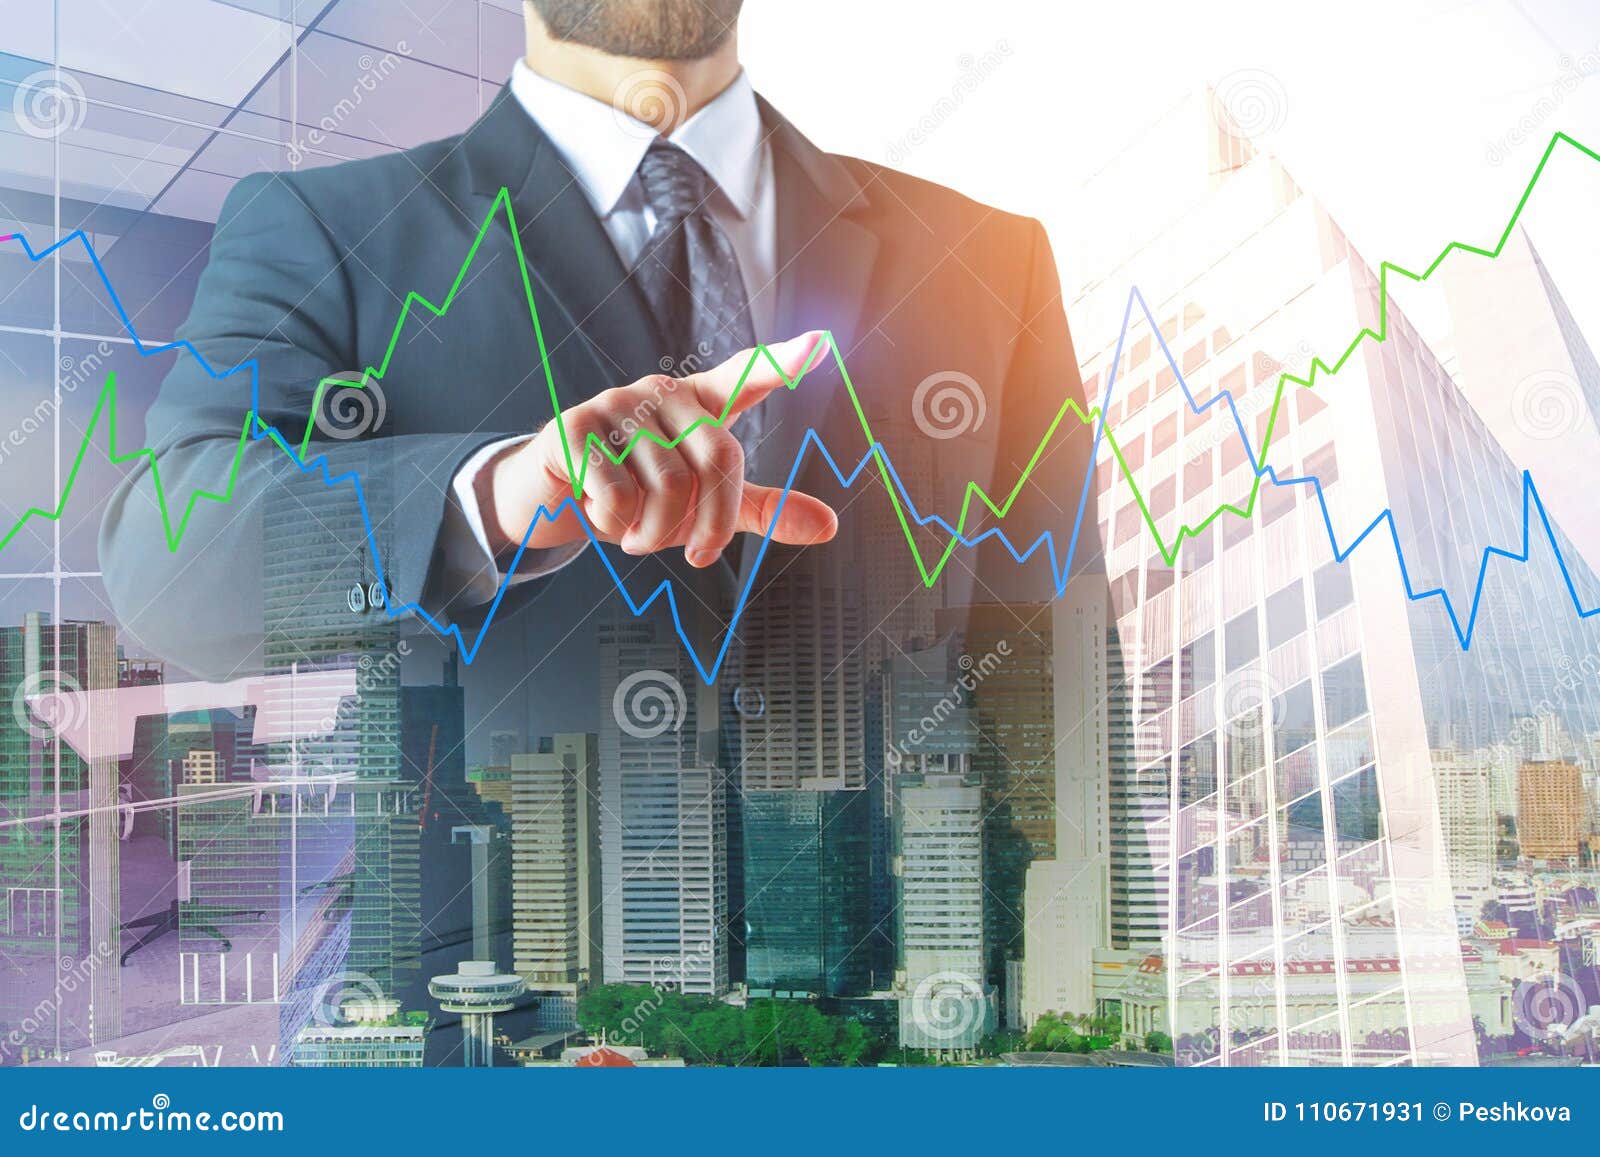 Investment And Monitoring Concept Stock Image Image of